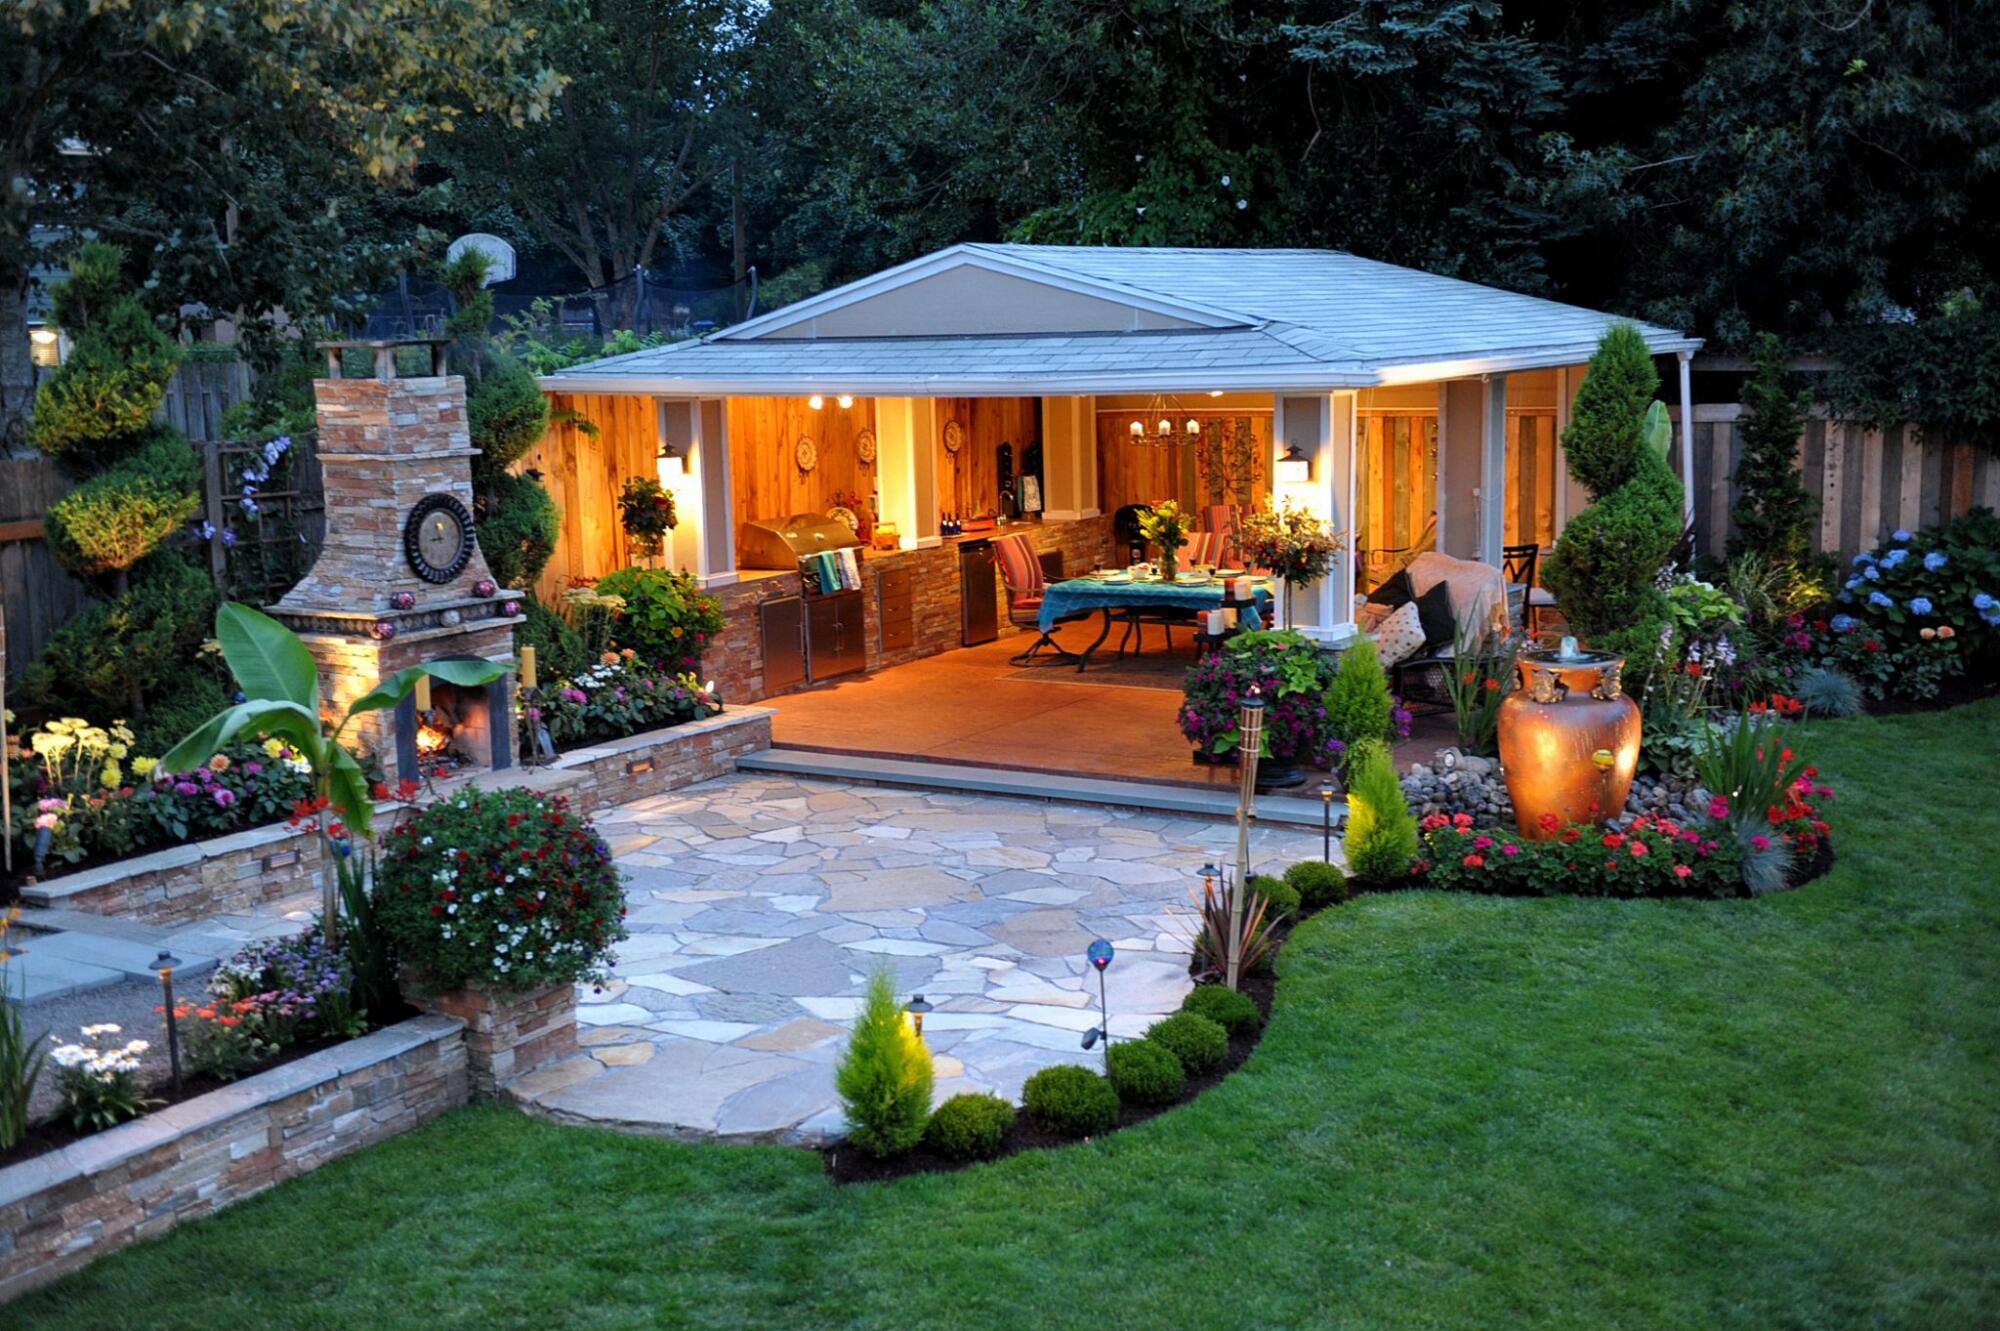 A backyard with an outdoor living space featuring a gazebo and fire pit.